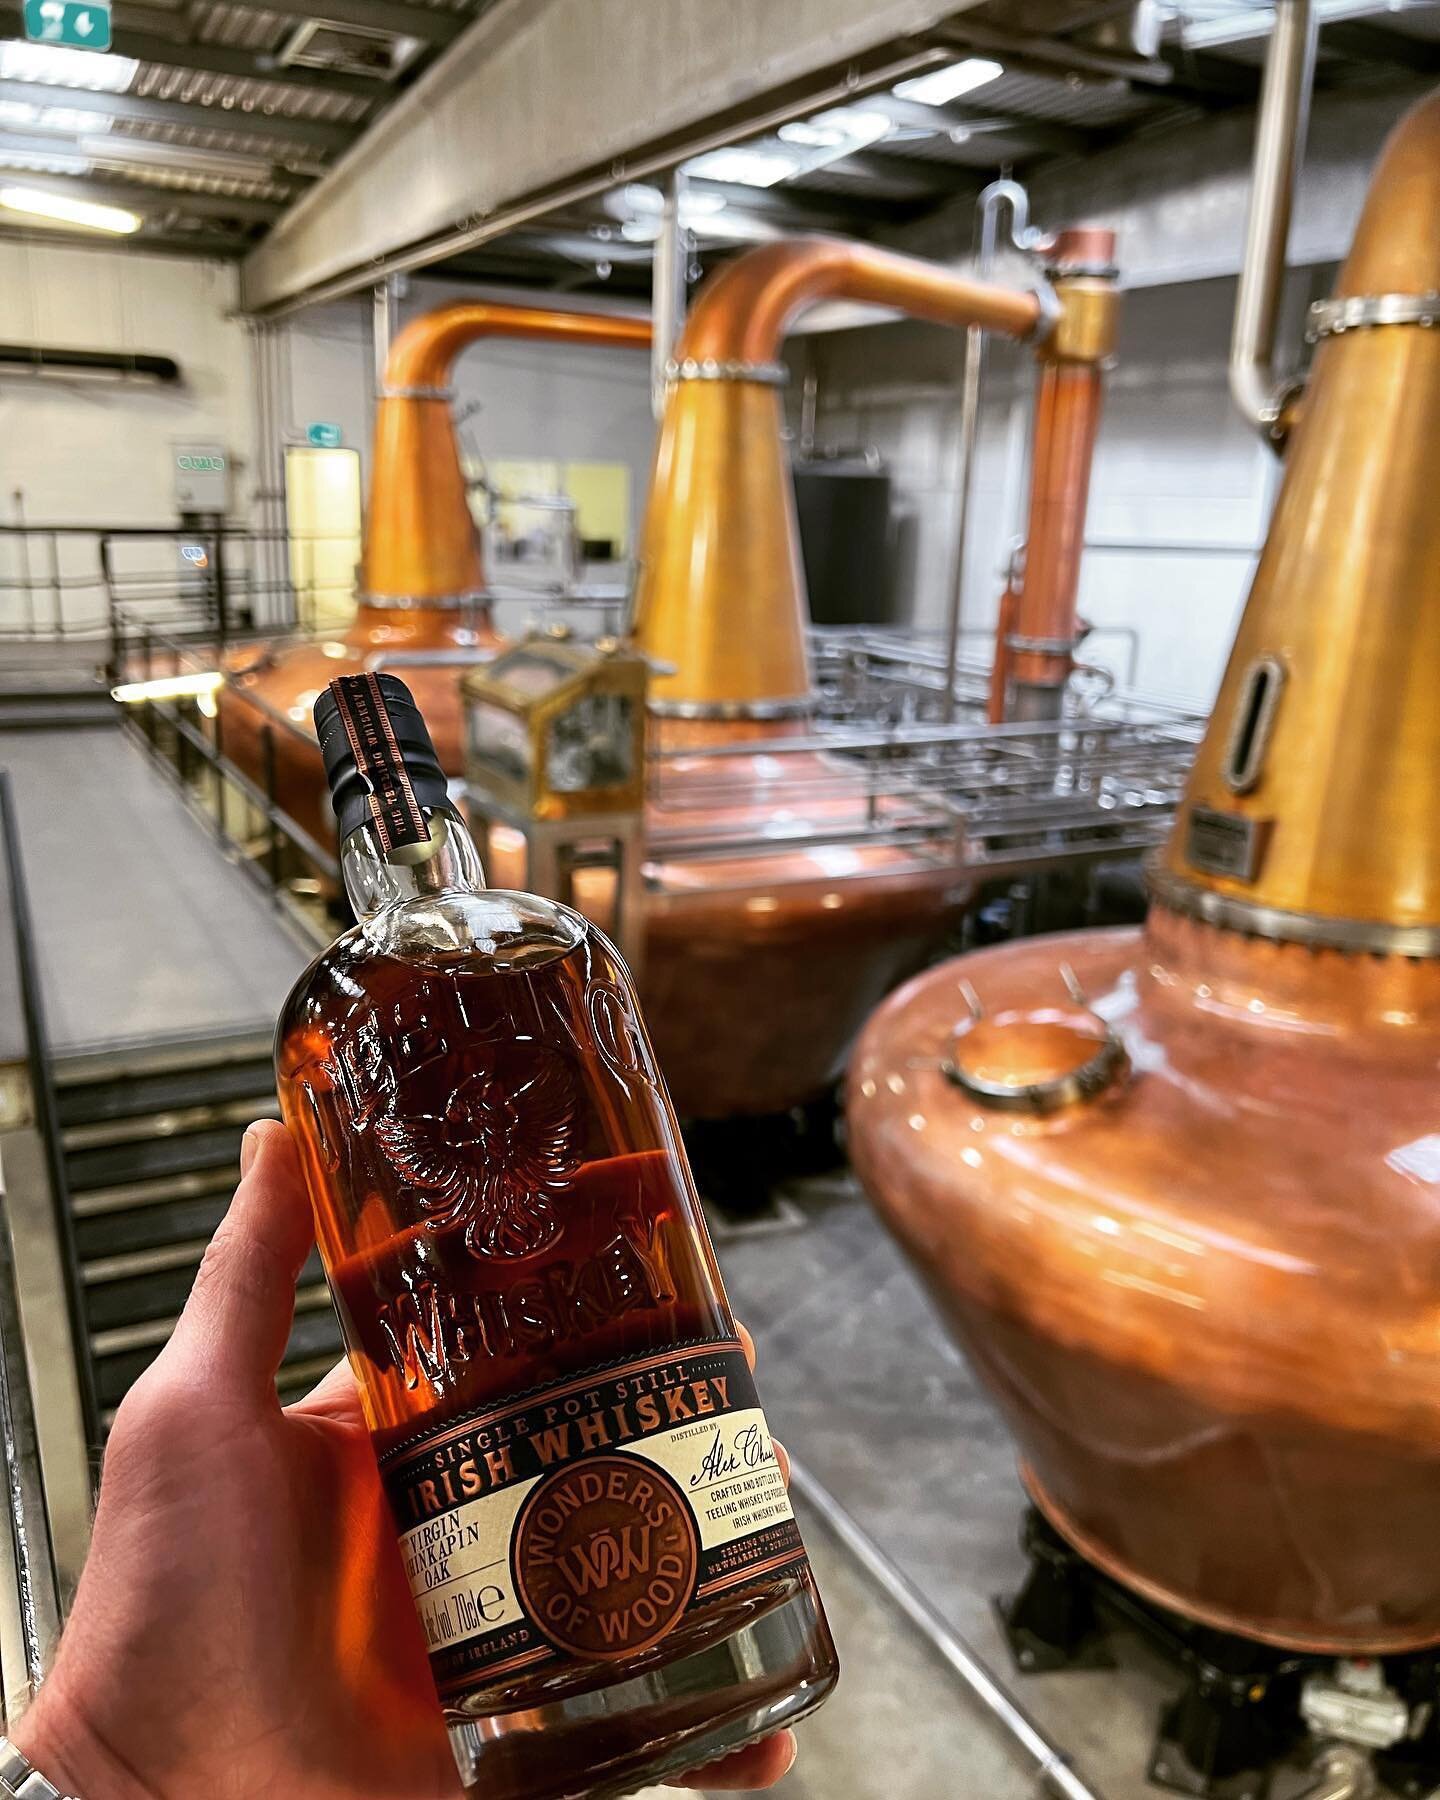 Congrats to the entire @teeling_whiskey team. Amazing product created in an amazing Frilli still!  For info on Frilli equipment in Australia and NZ please contact us via info@fbpropak.com
#repost &bull; 
@jackteeling WOW The Worlds Best Pot Still Whi